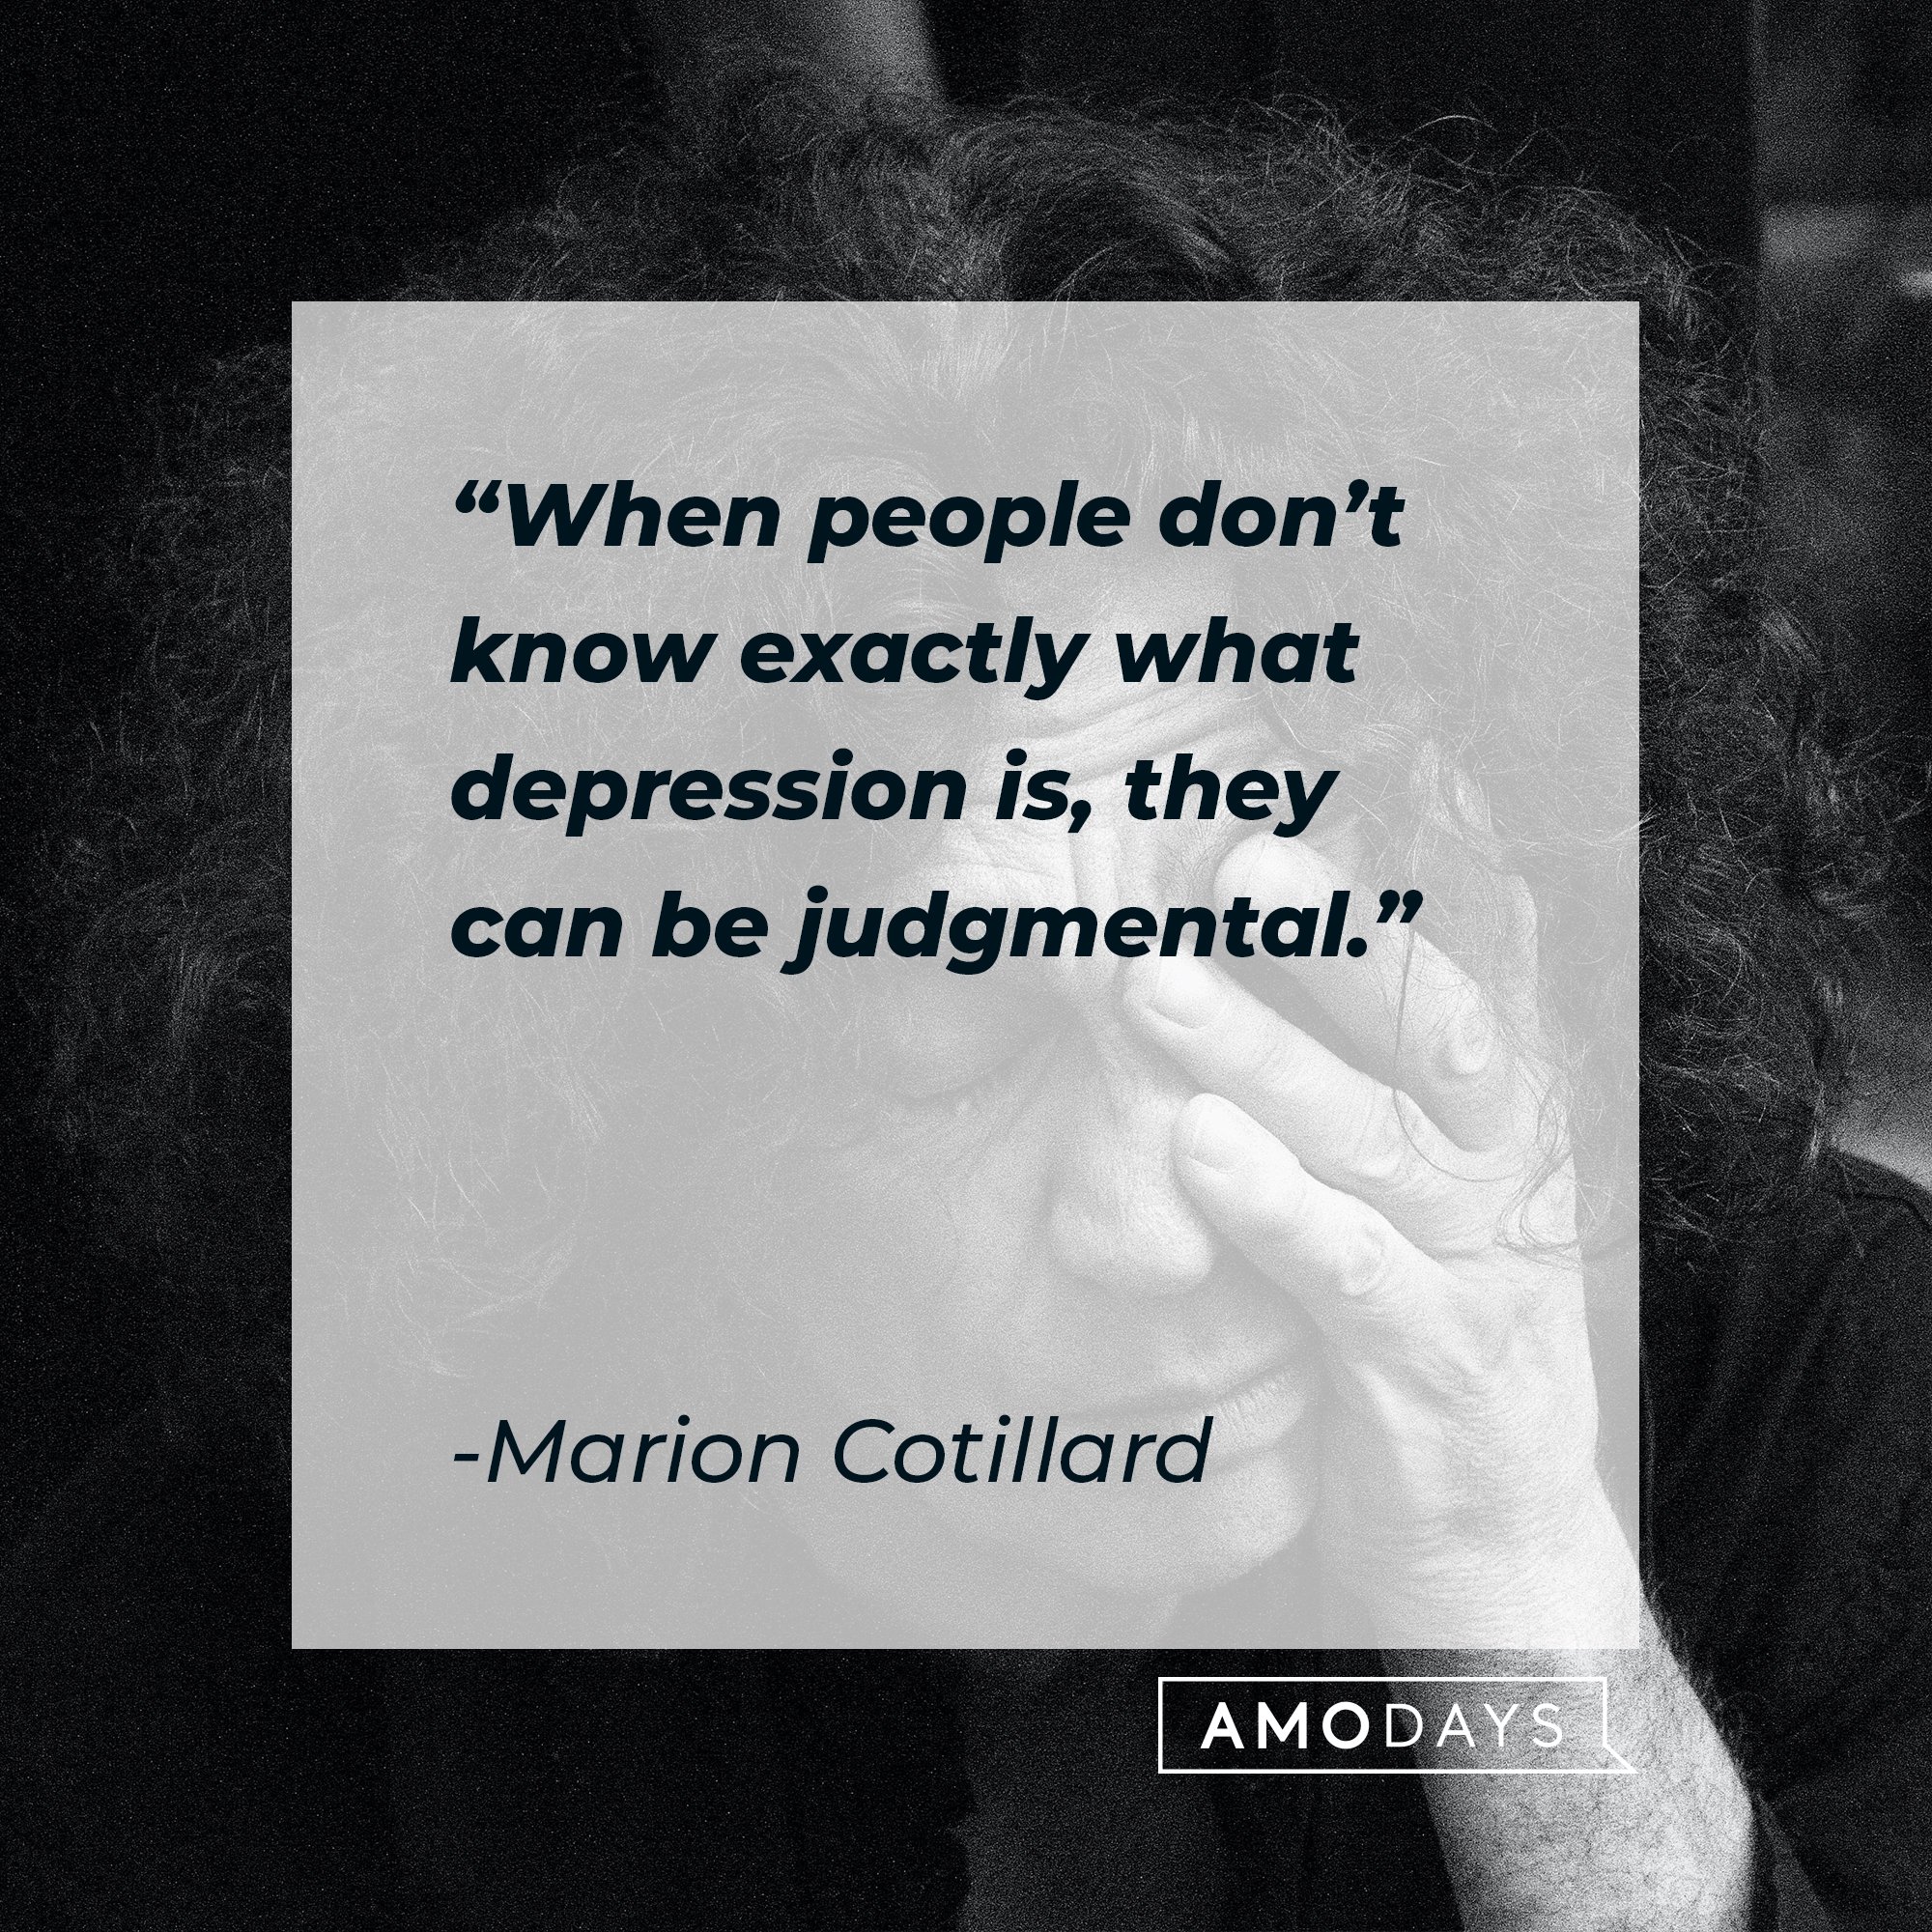 Marion Cotillard's quote: "When people don't know exactly what depression is, they can be judgmental." | Image: AmoDays